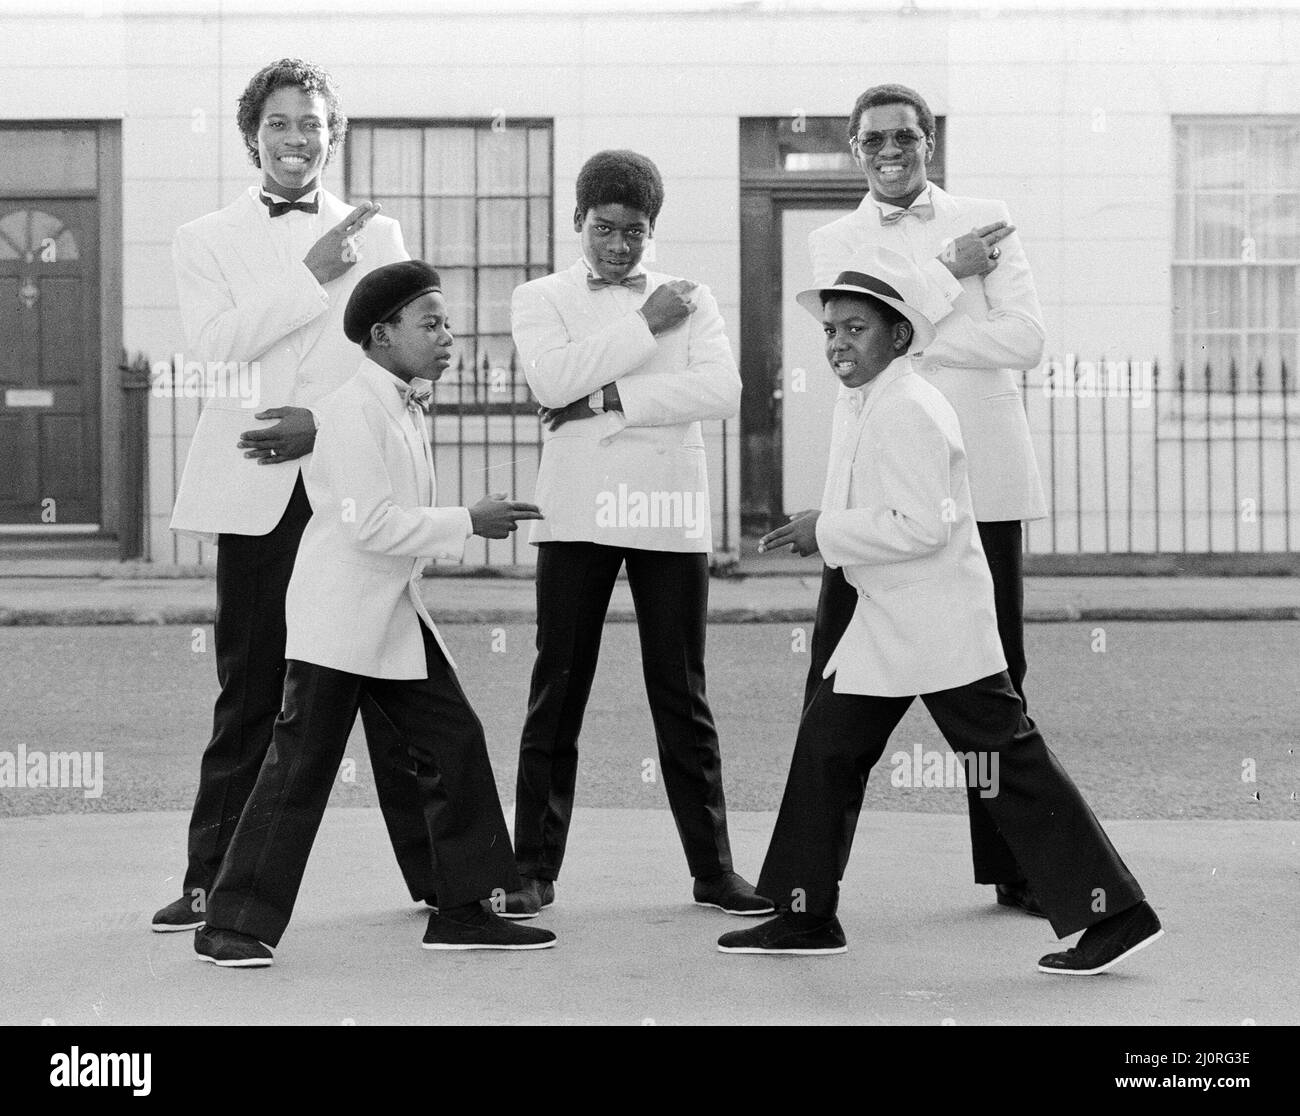 Musical Youth, British Jamaican pop / reggae group, who are currently recording the video for their lastest single titled '007', pictured 10th October 1983.  Members of the group are: Freddie Waite a.k.a. Junior, Dennis Seaton, Patrick Waite, Michael Grant & Kelvin Grant *** Local Caption *** Freddie Waite Junior Joir Dennis Seaton Patrick Waite Michael Grant Kelvin Grant Stock Photo